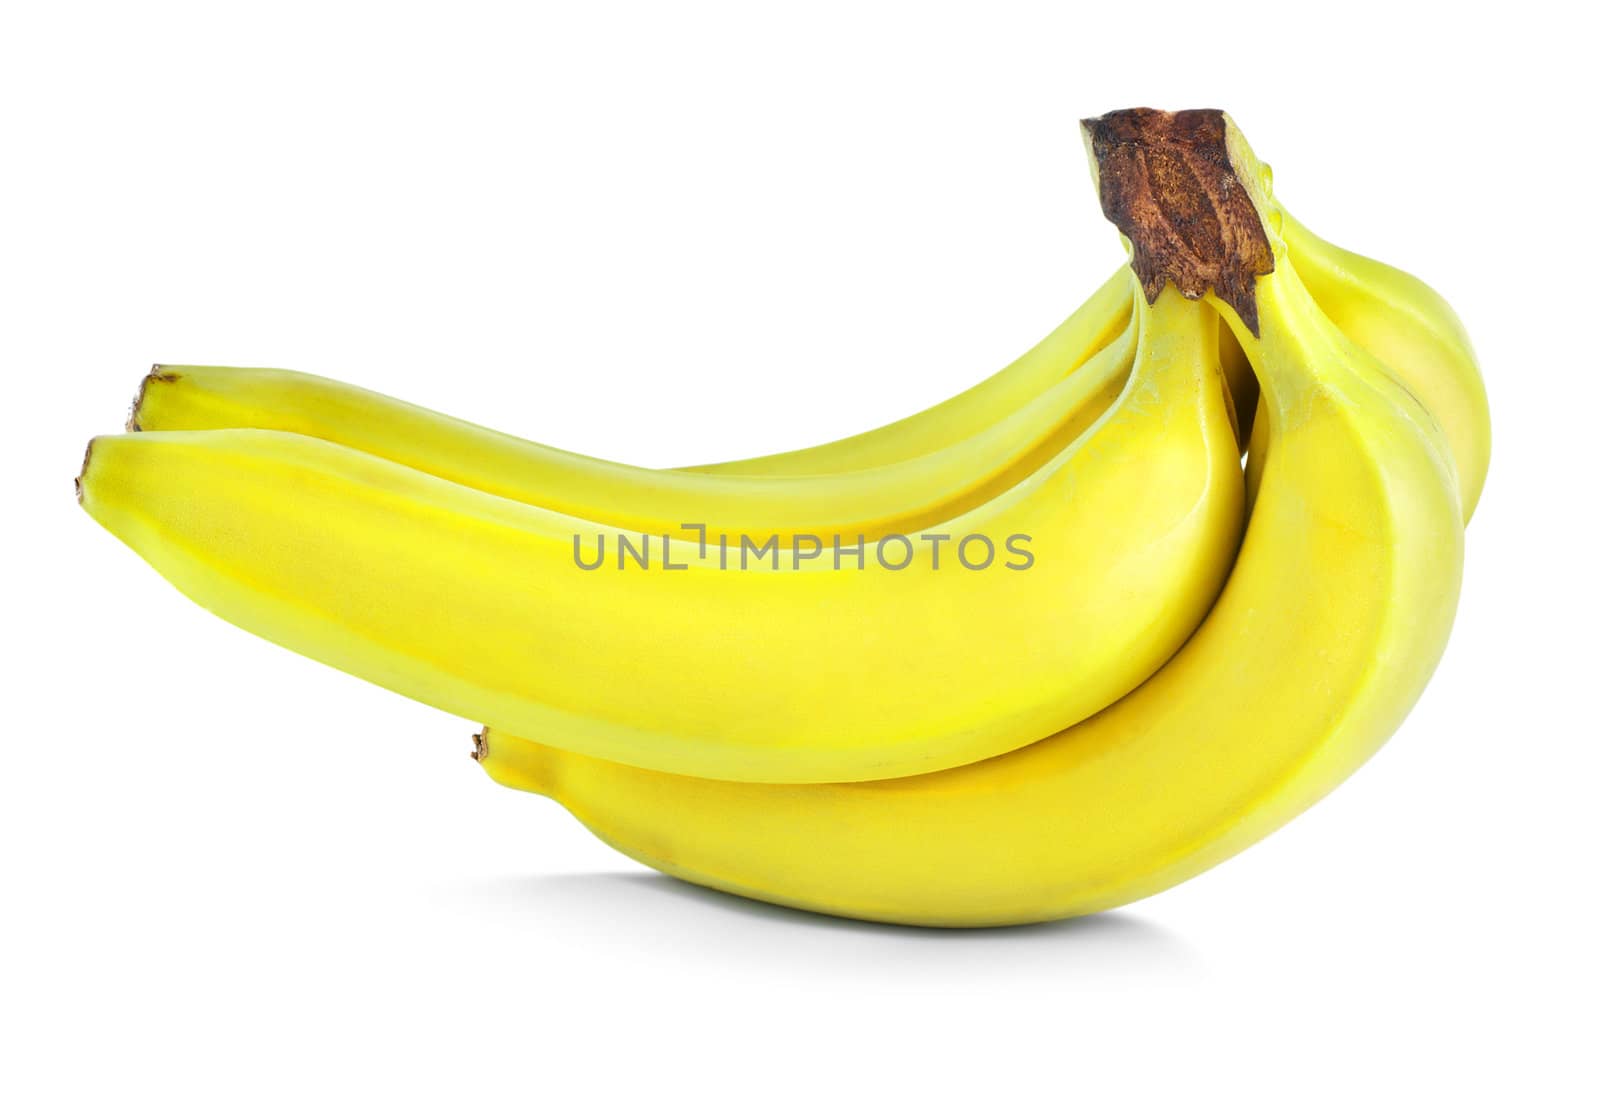 Bunch of yellow bananas isolated on white background